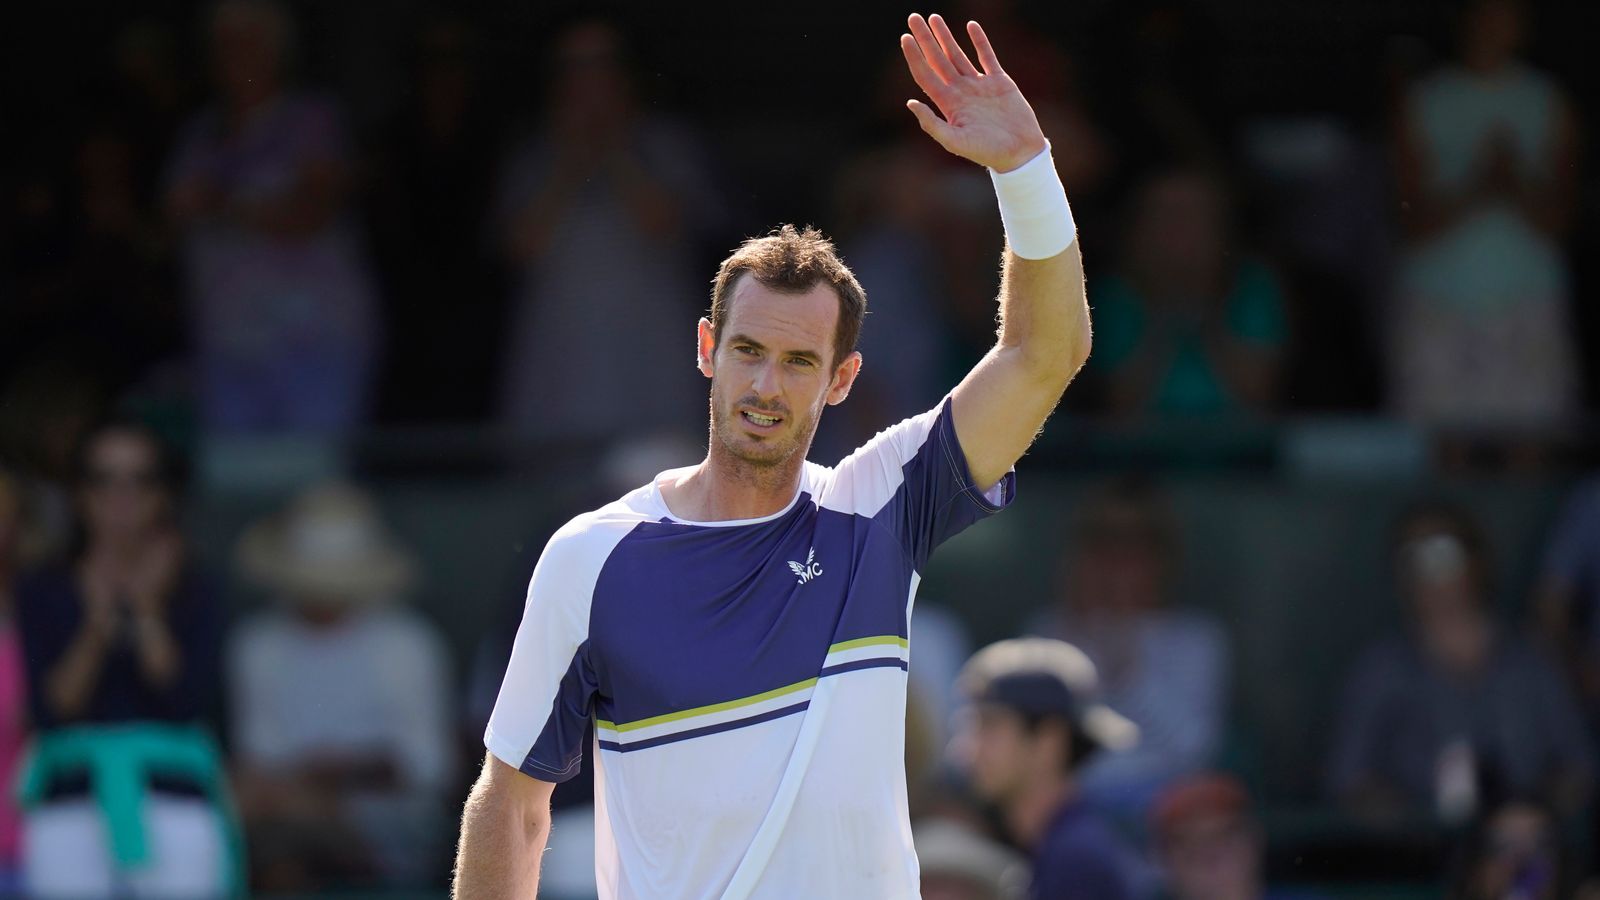 Andy Murray: Former world No 1 sees his Rhode Island journey ended by Alexander Bublik